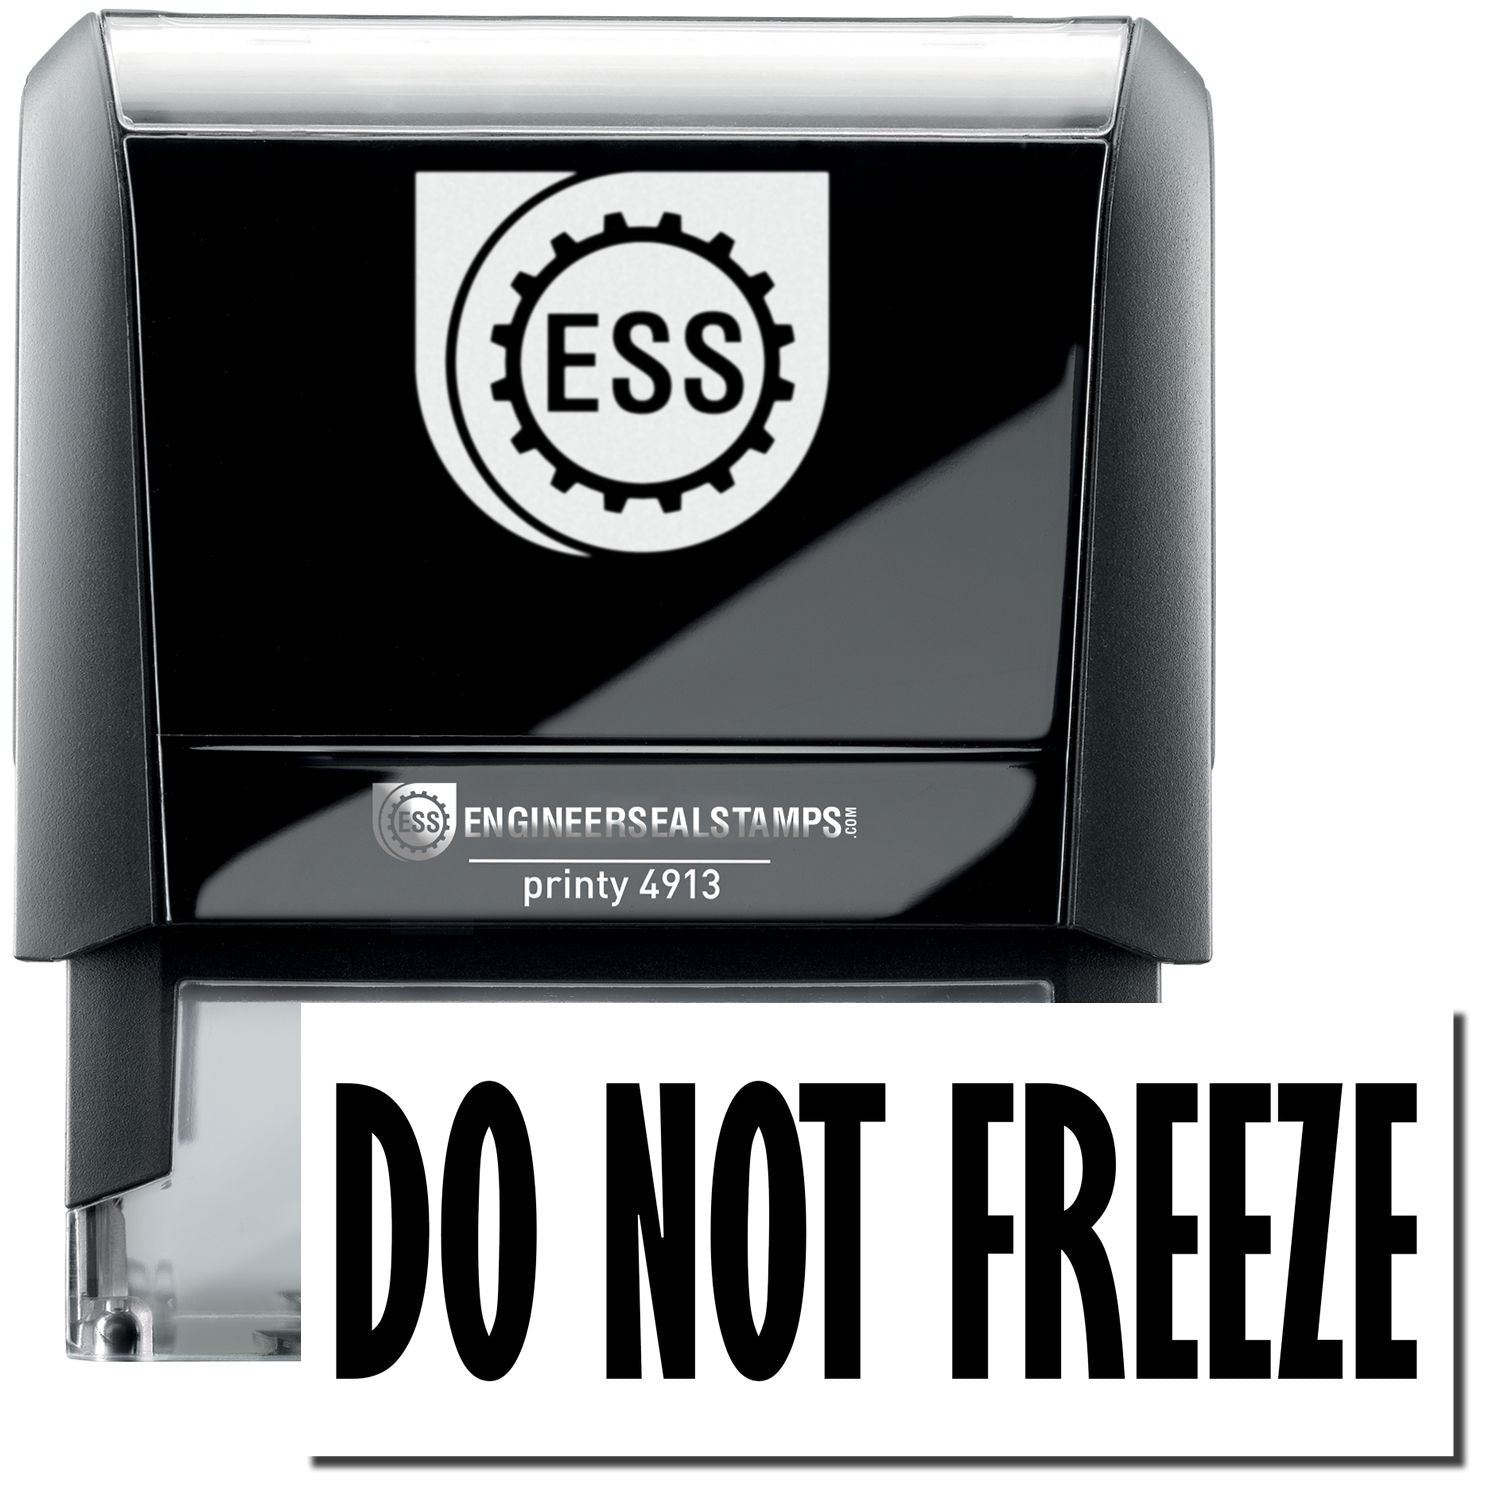 A self-inking stamp with a stamped image showing how the text "DO NOT FREEZE" in a large bold font is displayed by it.